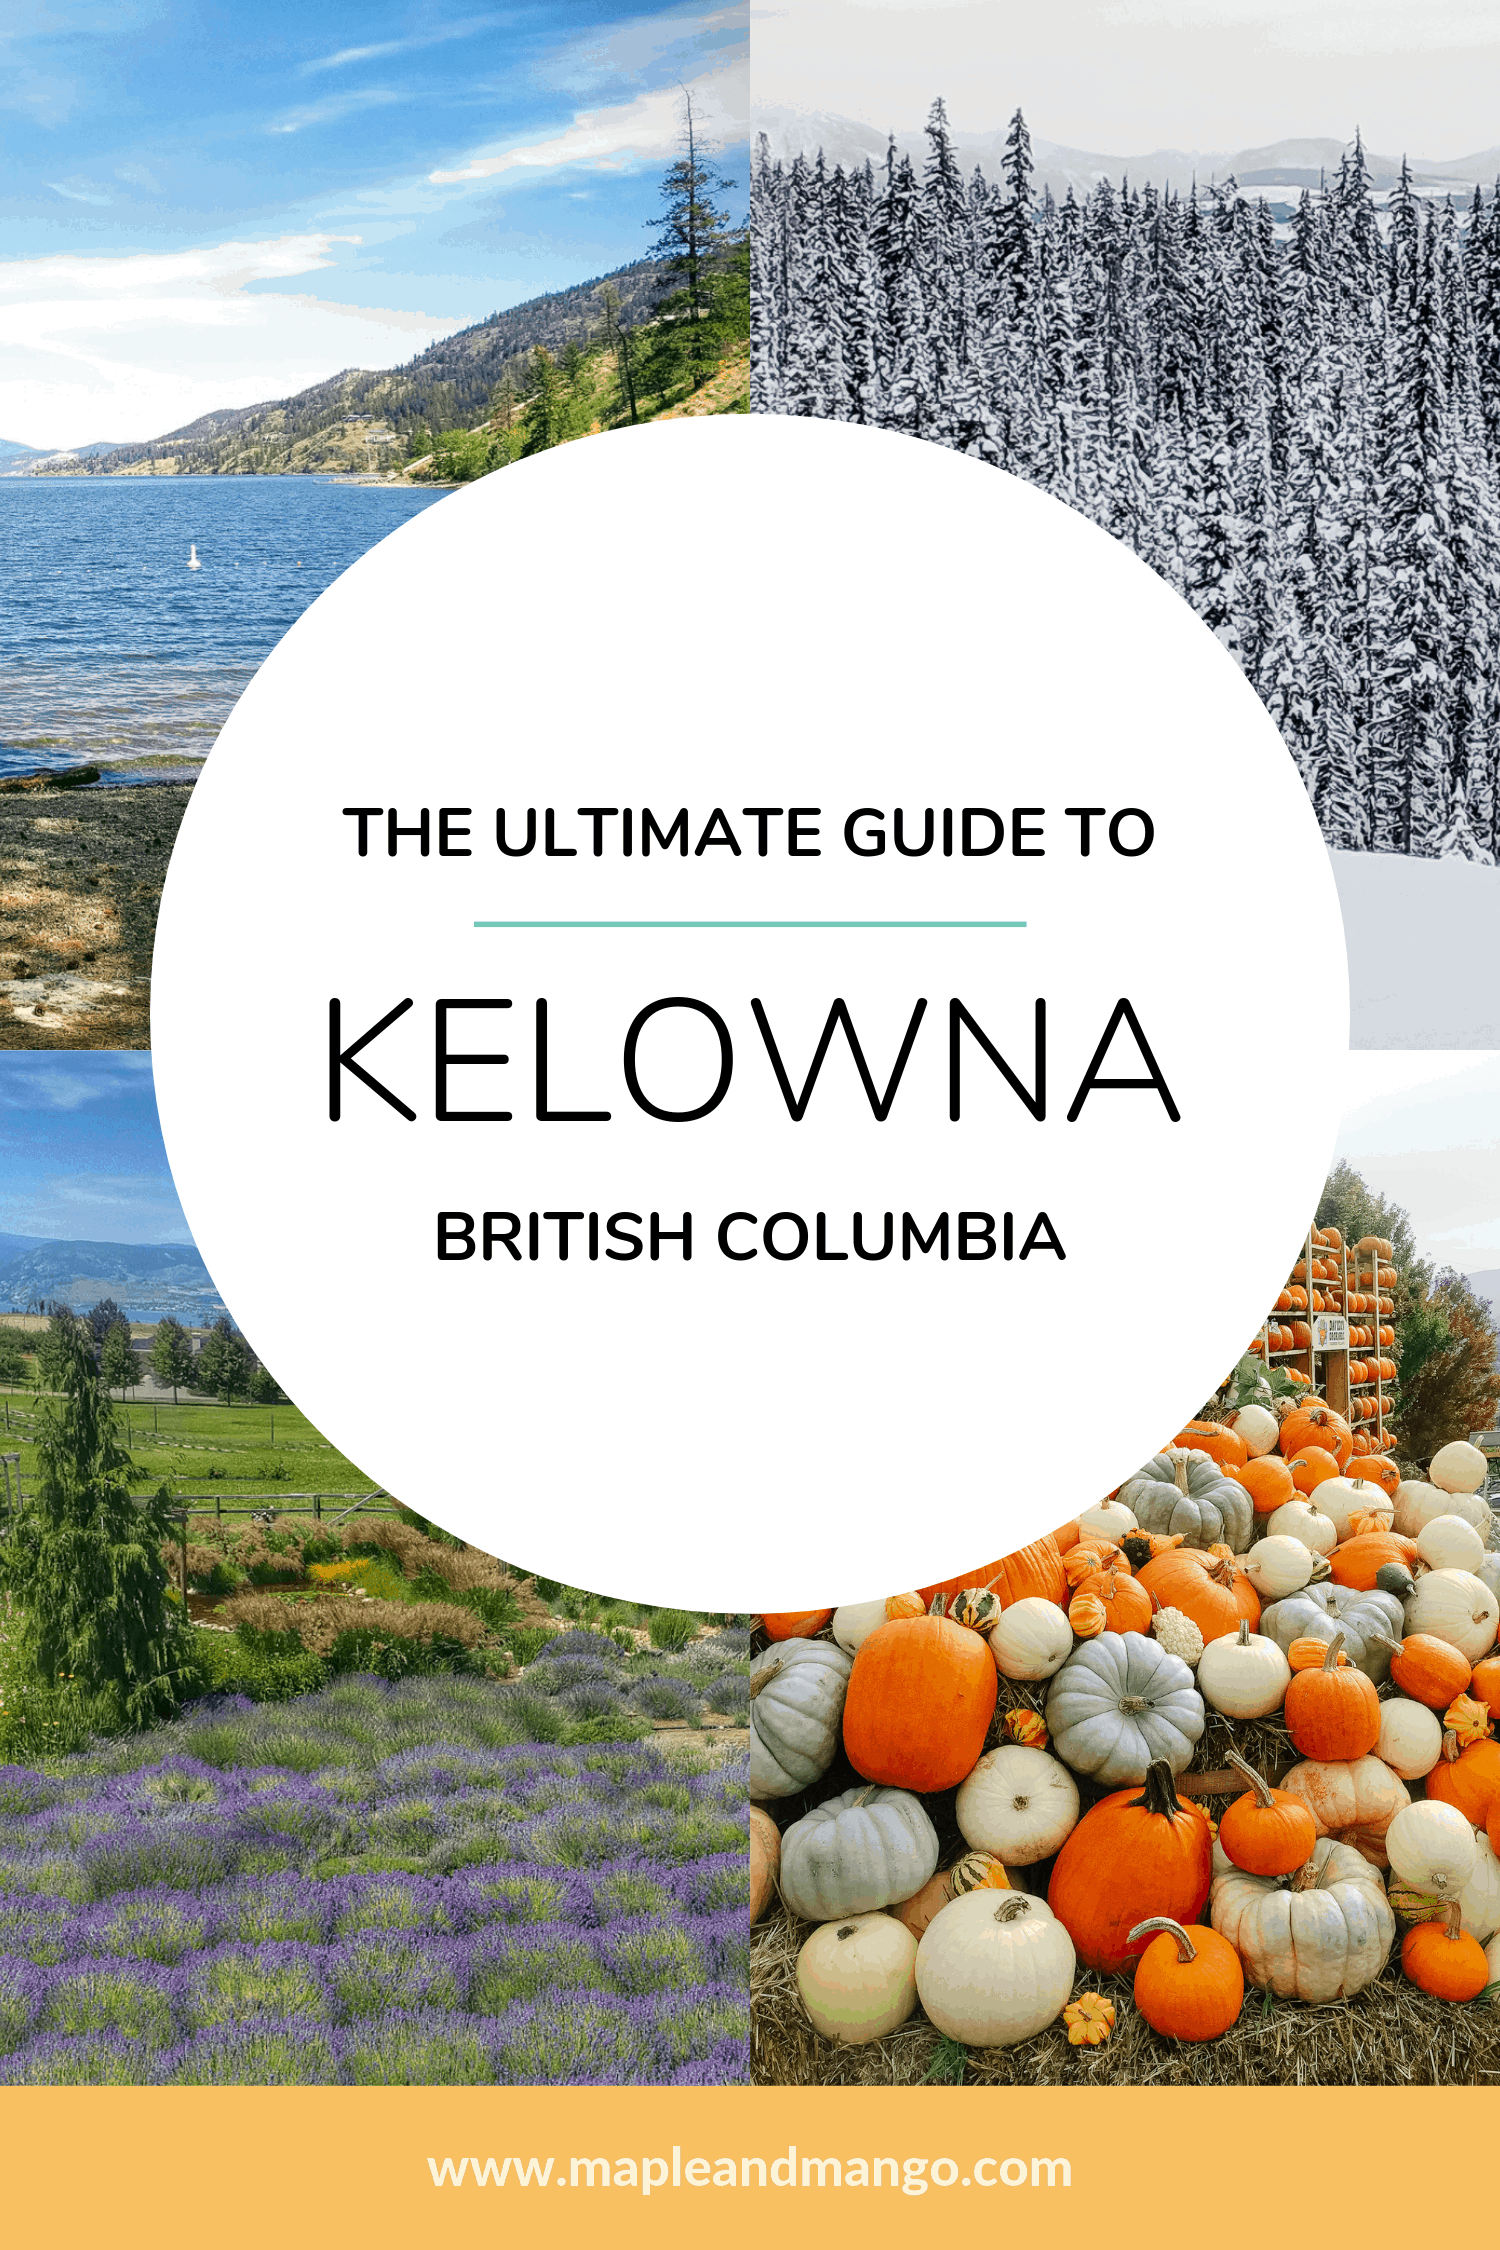 Pinterest image for The Ultimate Guide To Kelowna